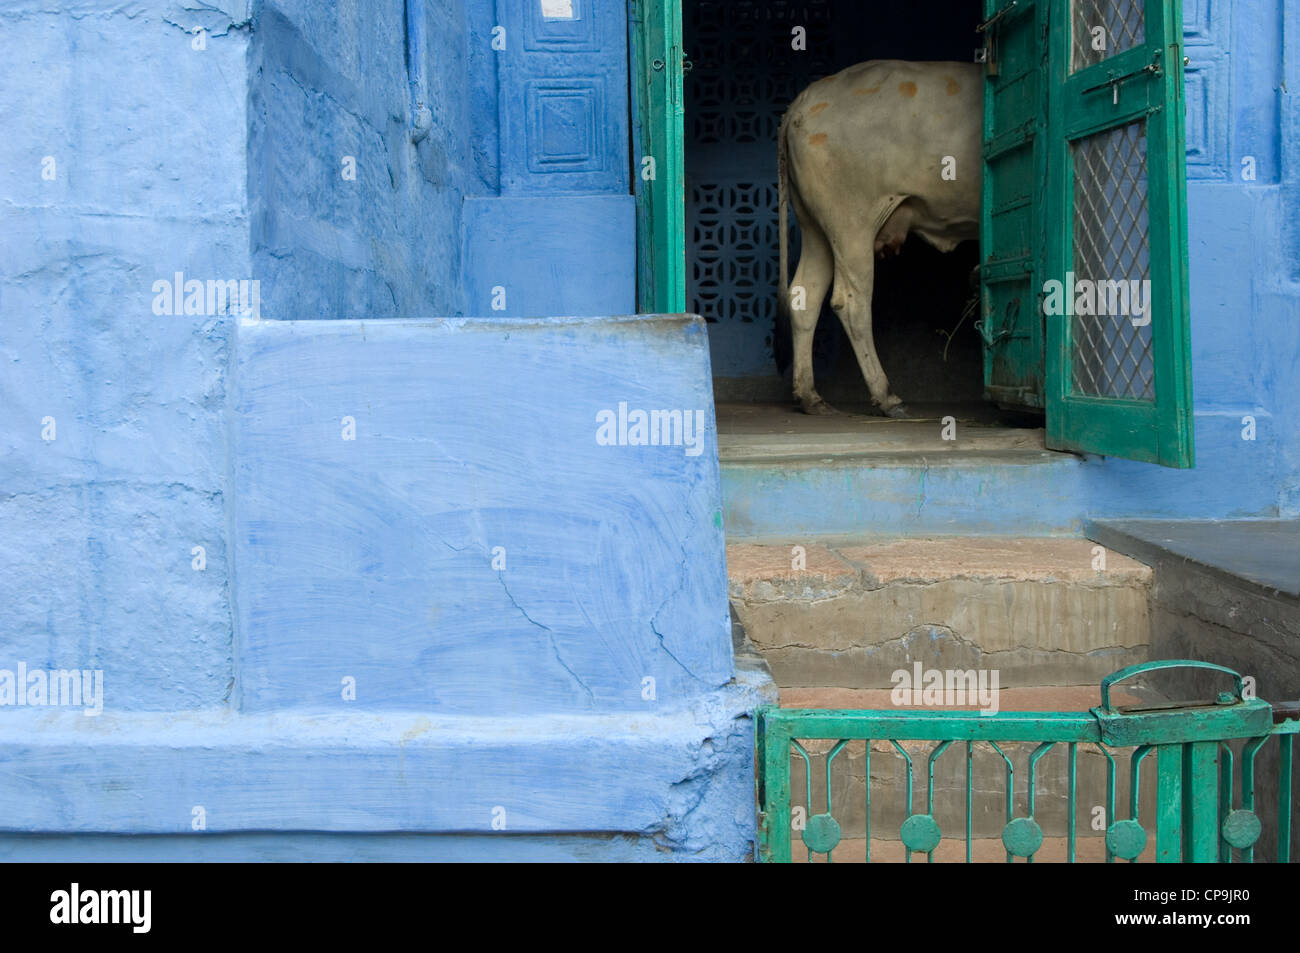 The walls of dwellings inside the old city of Jodhpur are painted blue to keep the narrow lanes cool and free of mosquitos, Jodhpur, Rajasthan, India Stock Photo